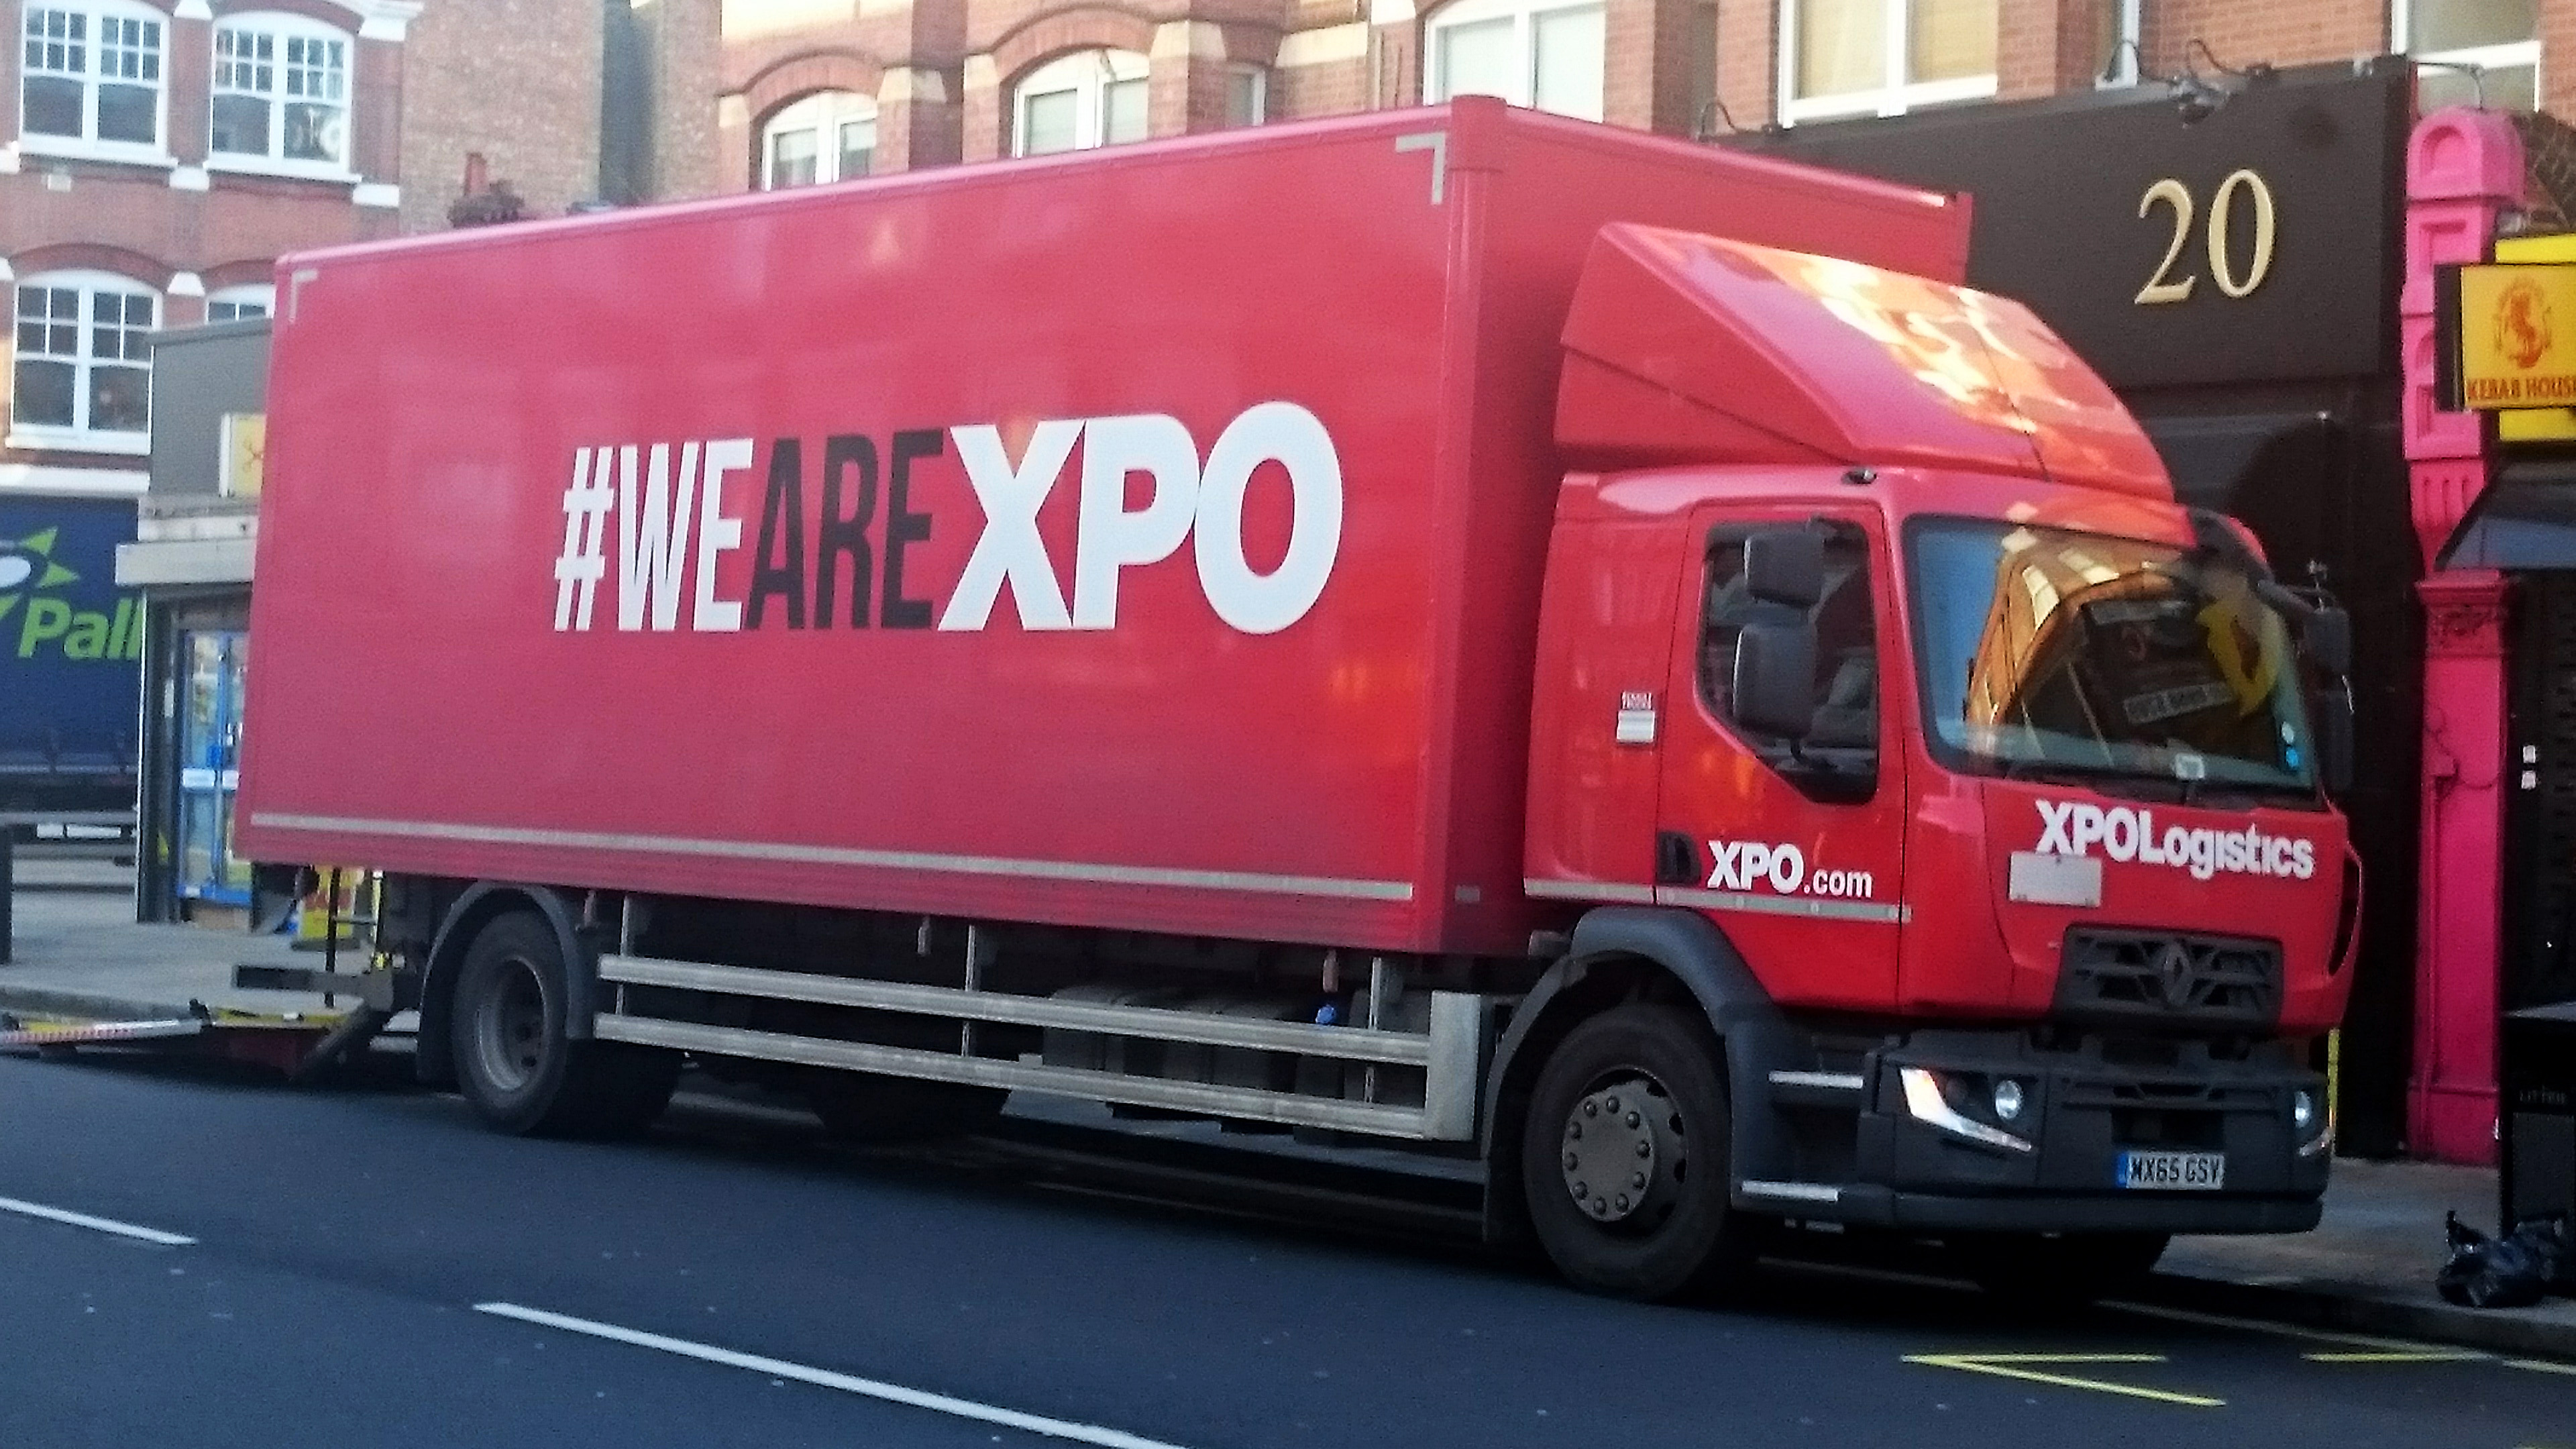 Logistics is star performer for XPO | Logistics Manager